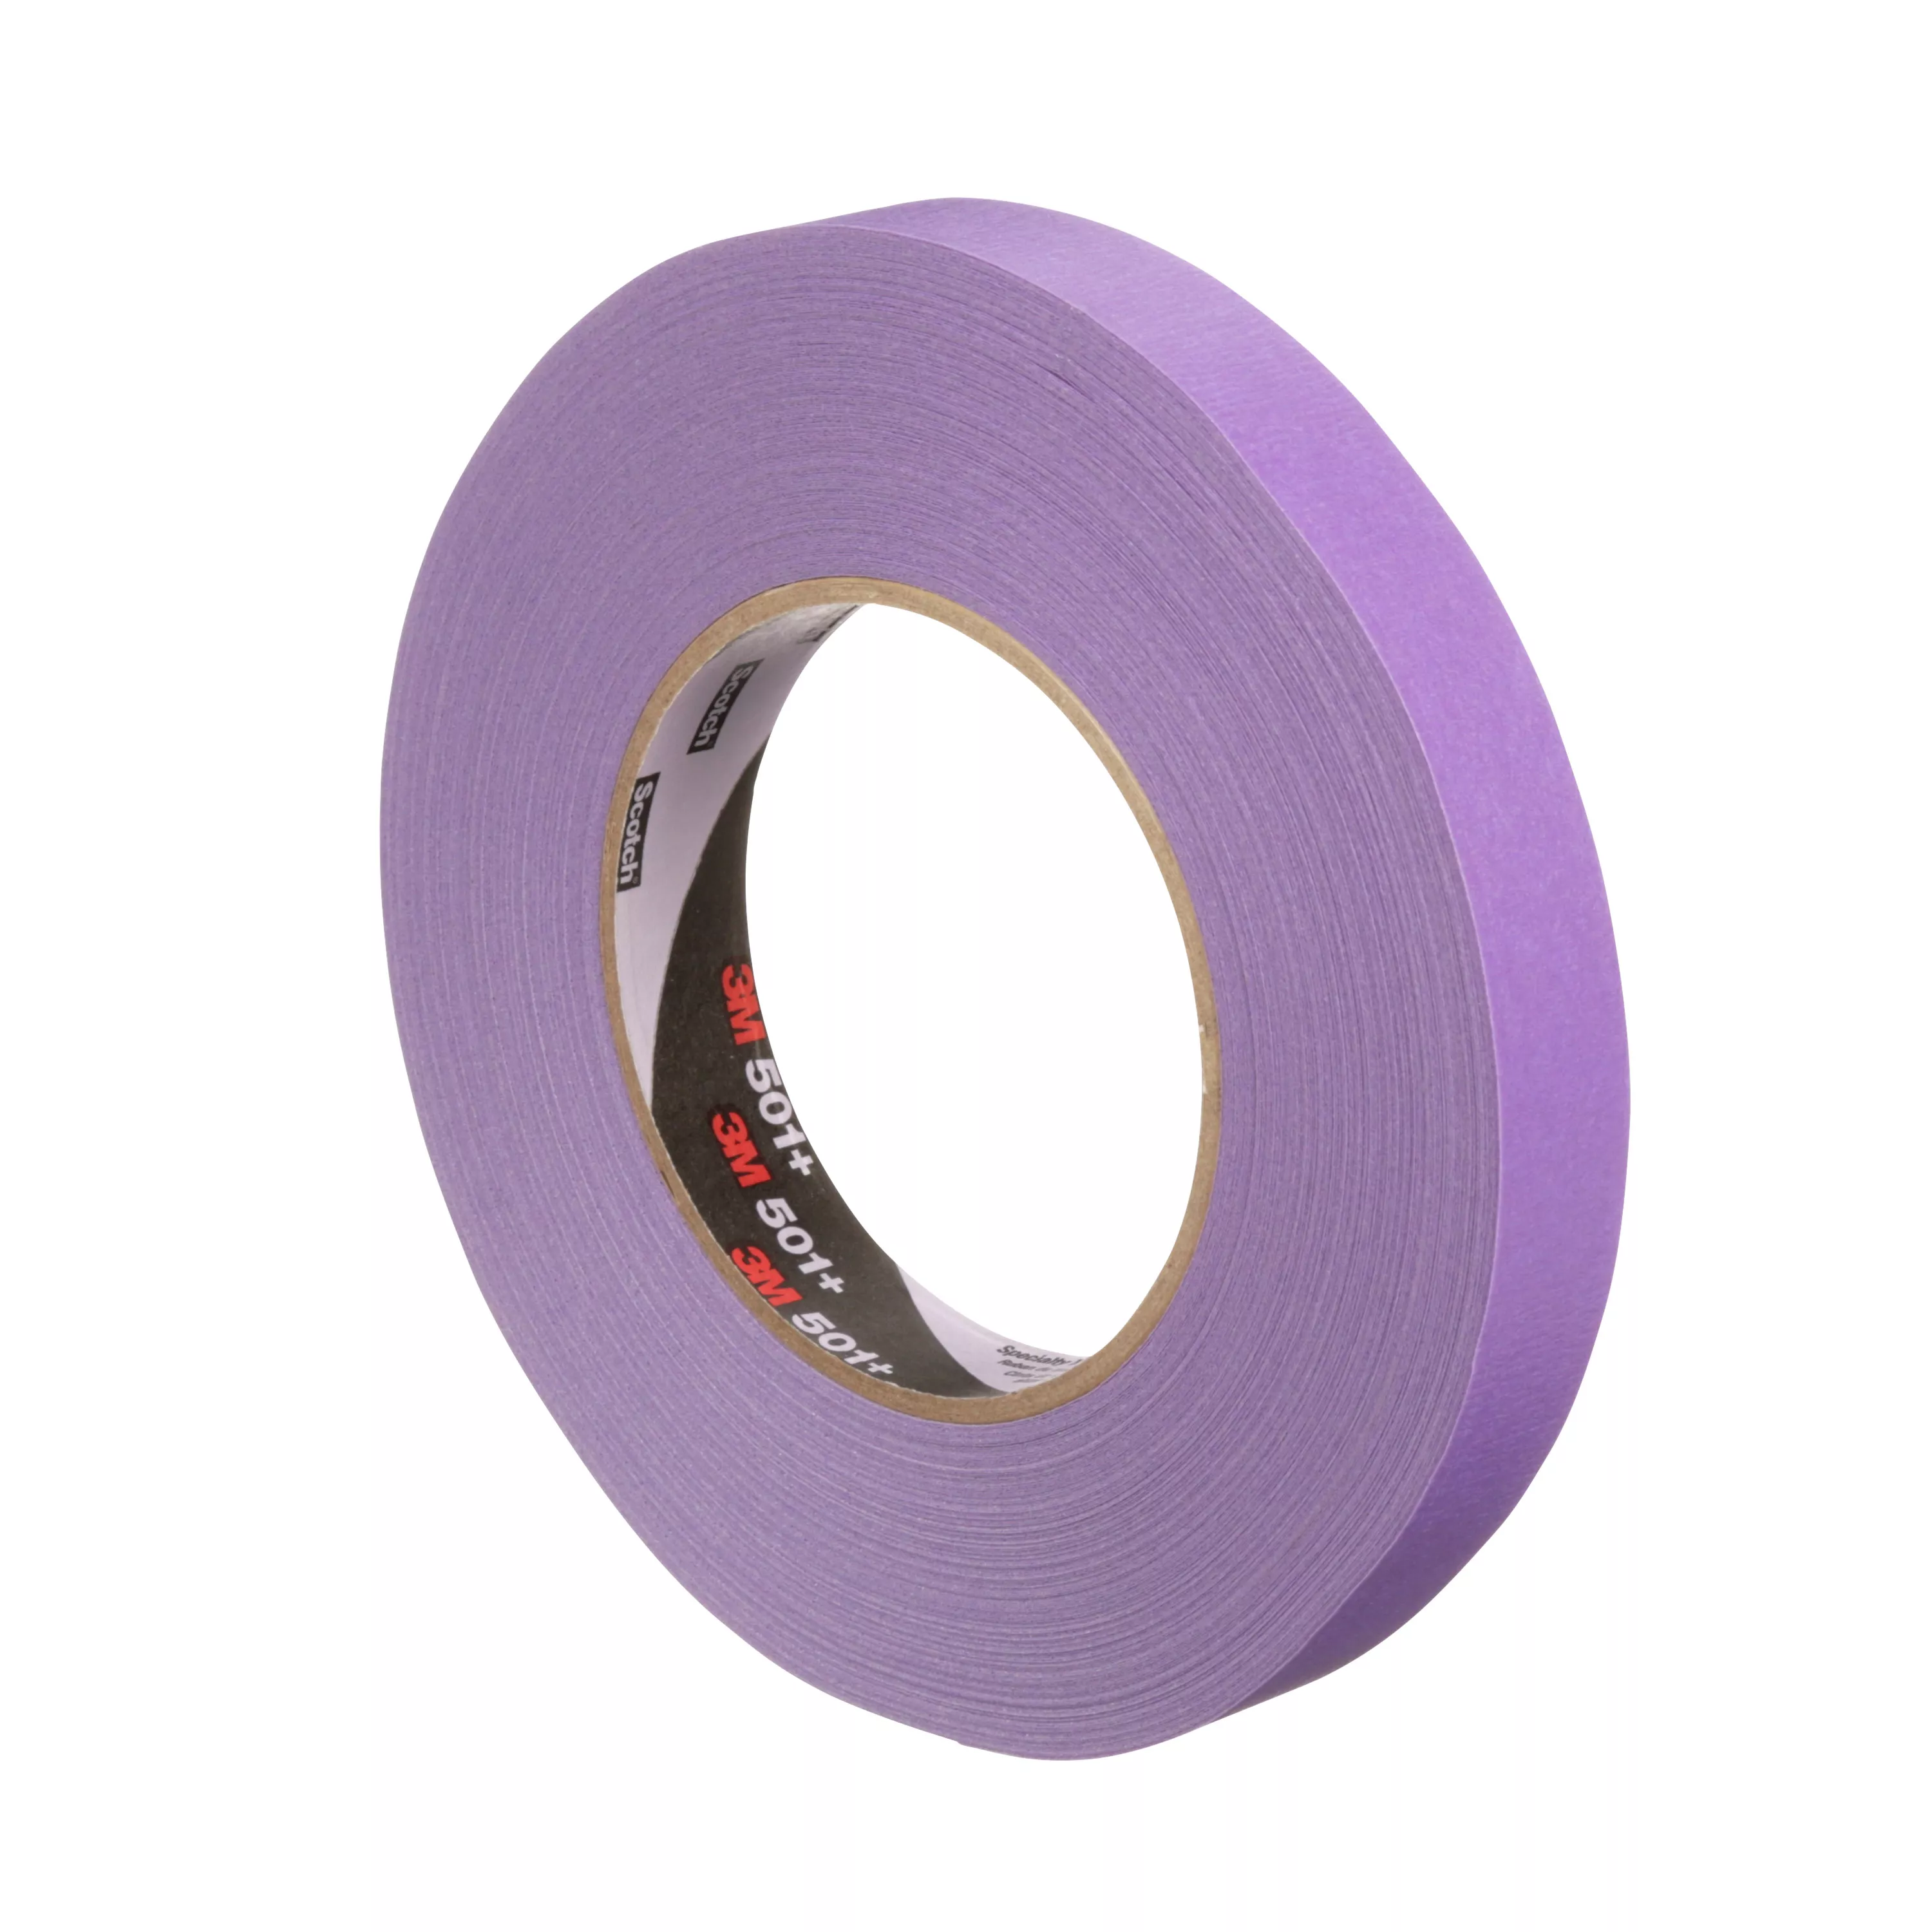 SKU 7100086193 | 3M™ Specialty High Temperature Masking Tape 501+